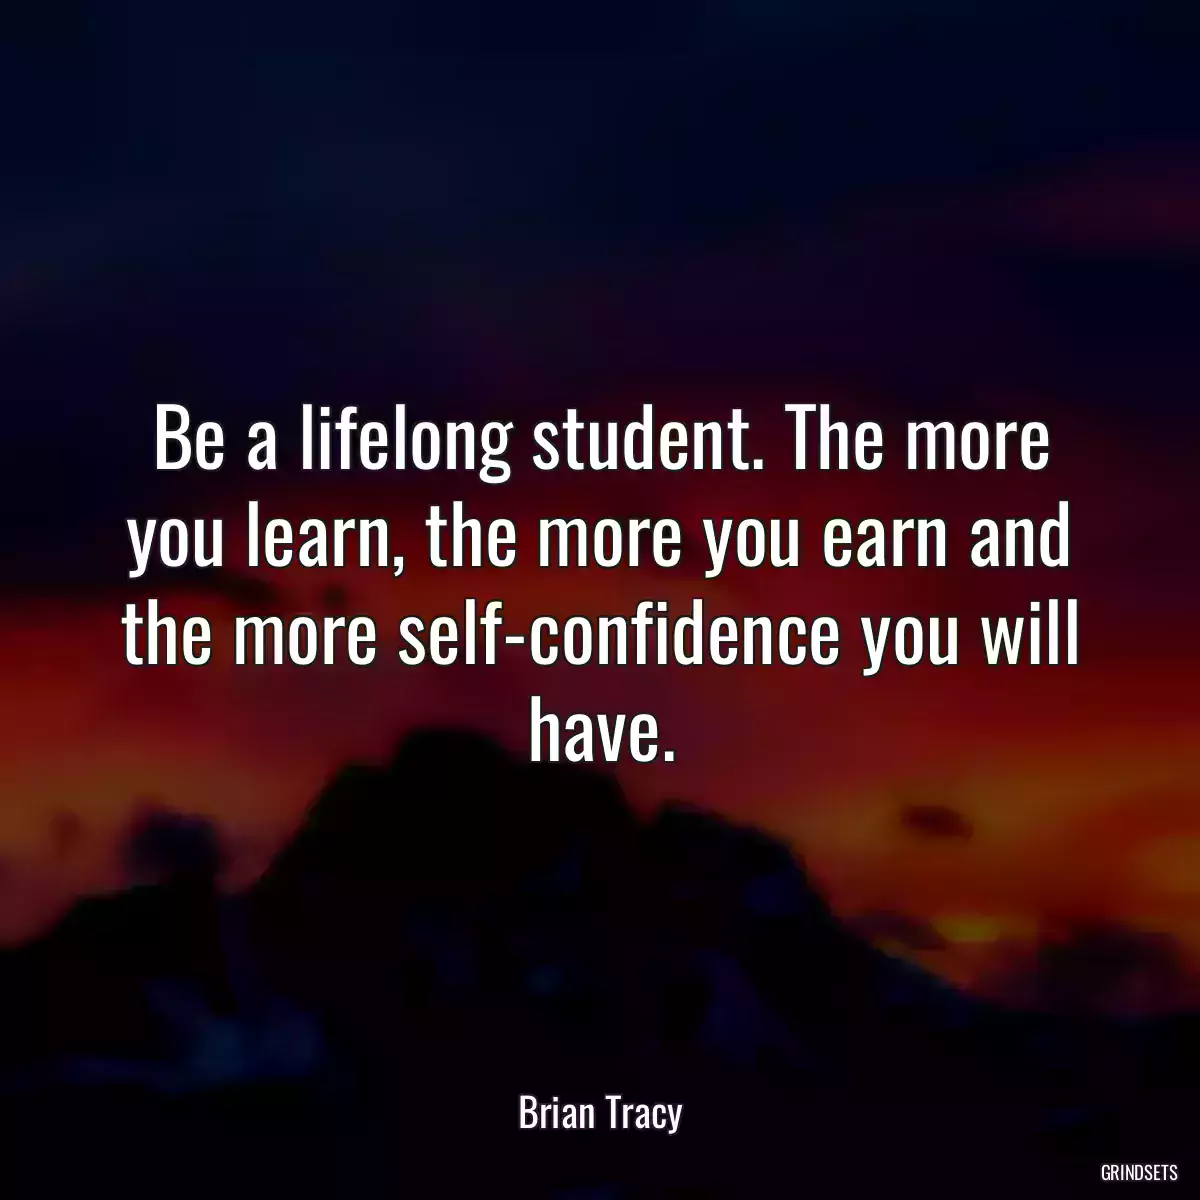 Be a lifelong student. The more you learn, the more you earn and the more self-confidence you will have.